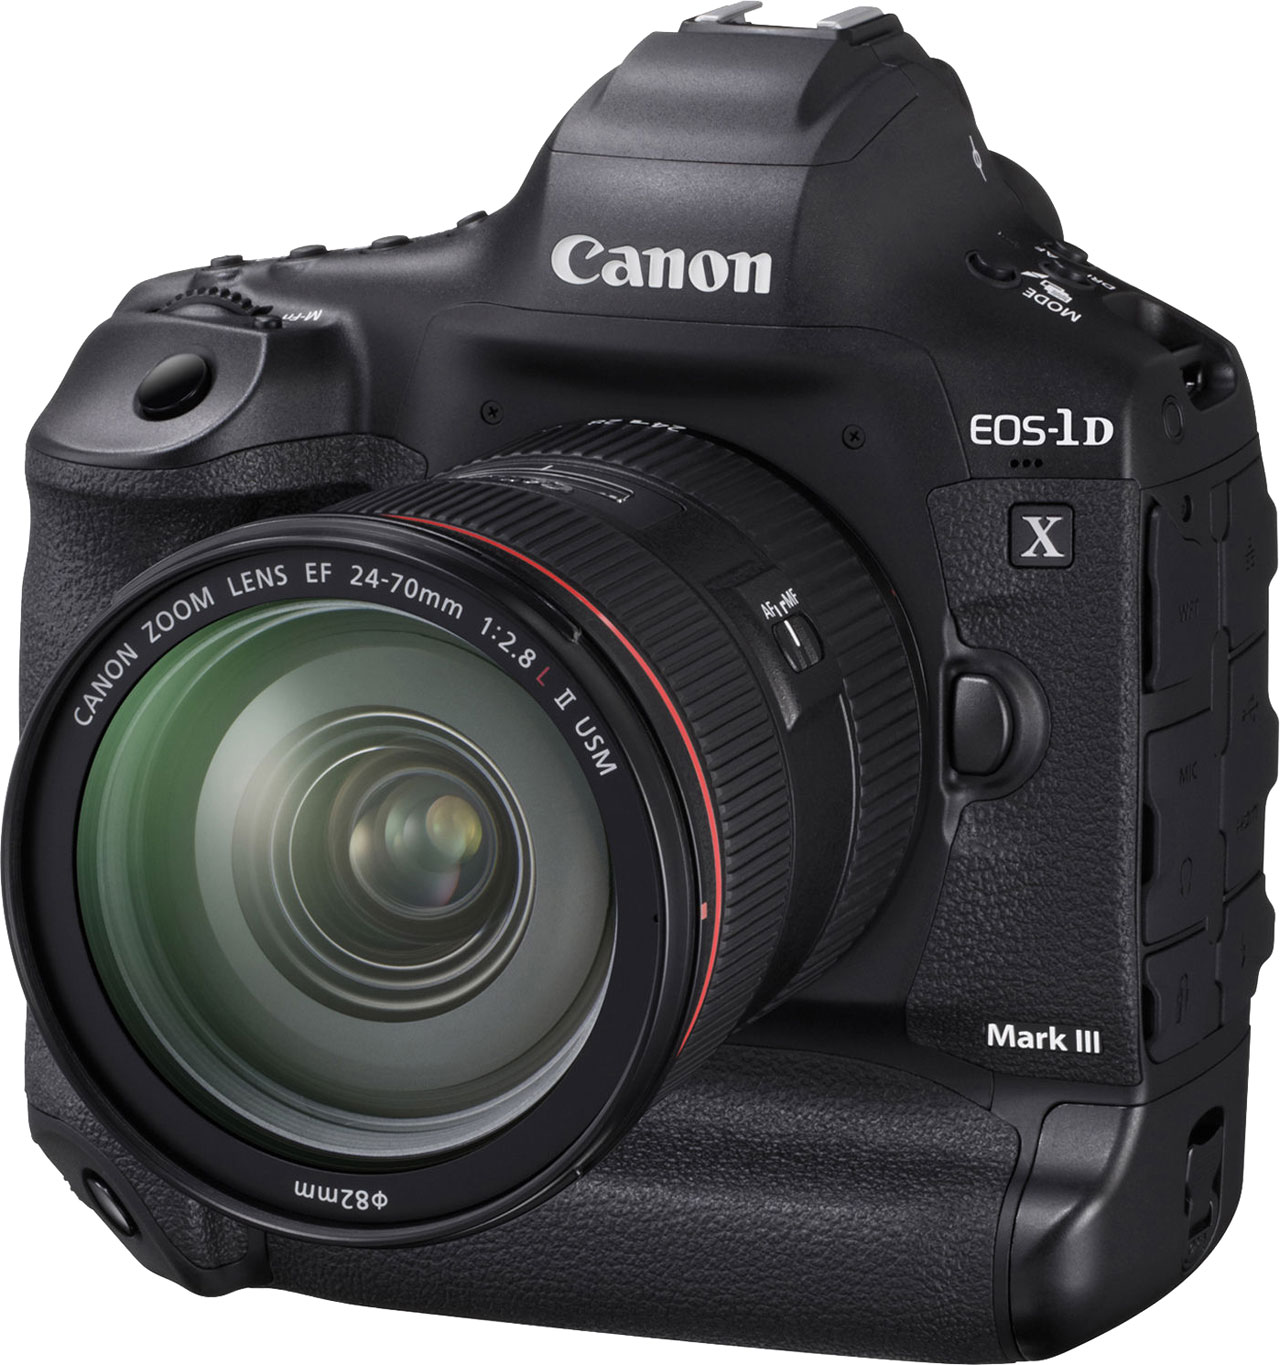 Canon EOS-1D X Mark III DSLR Becomes Official - Guide To Cam